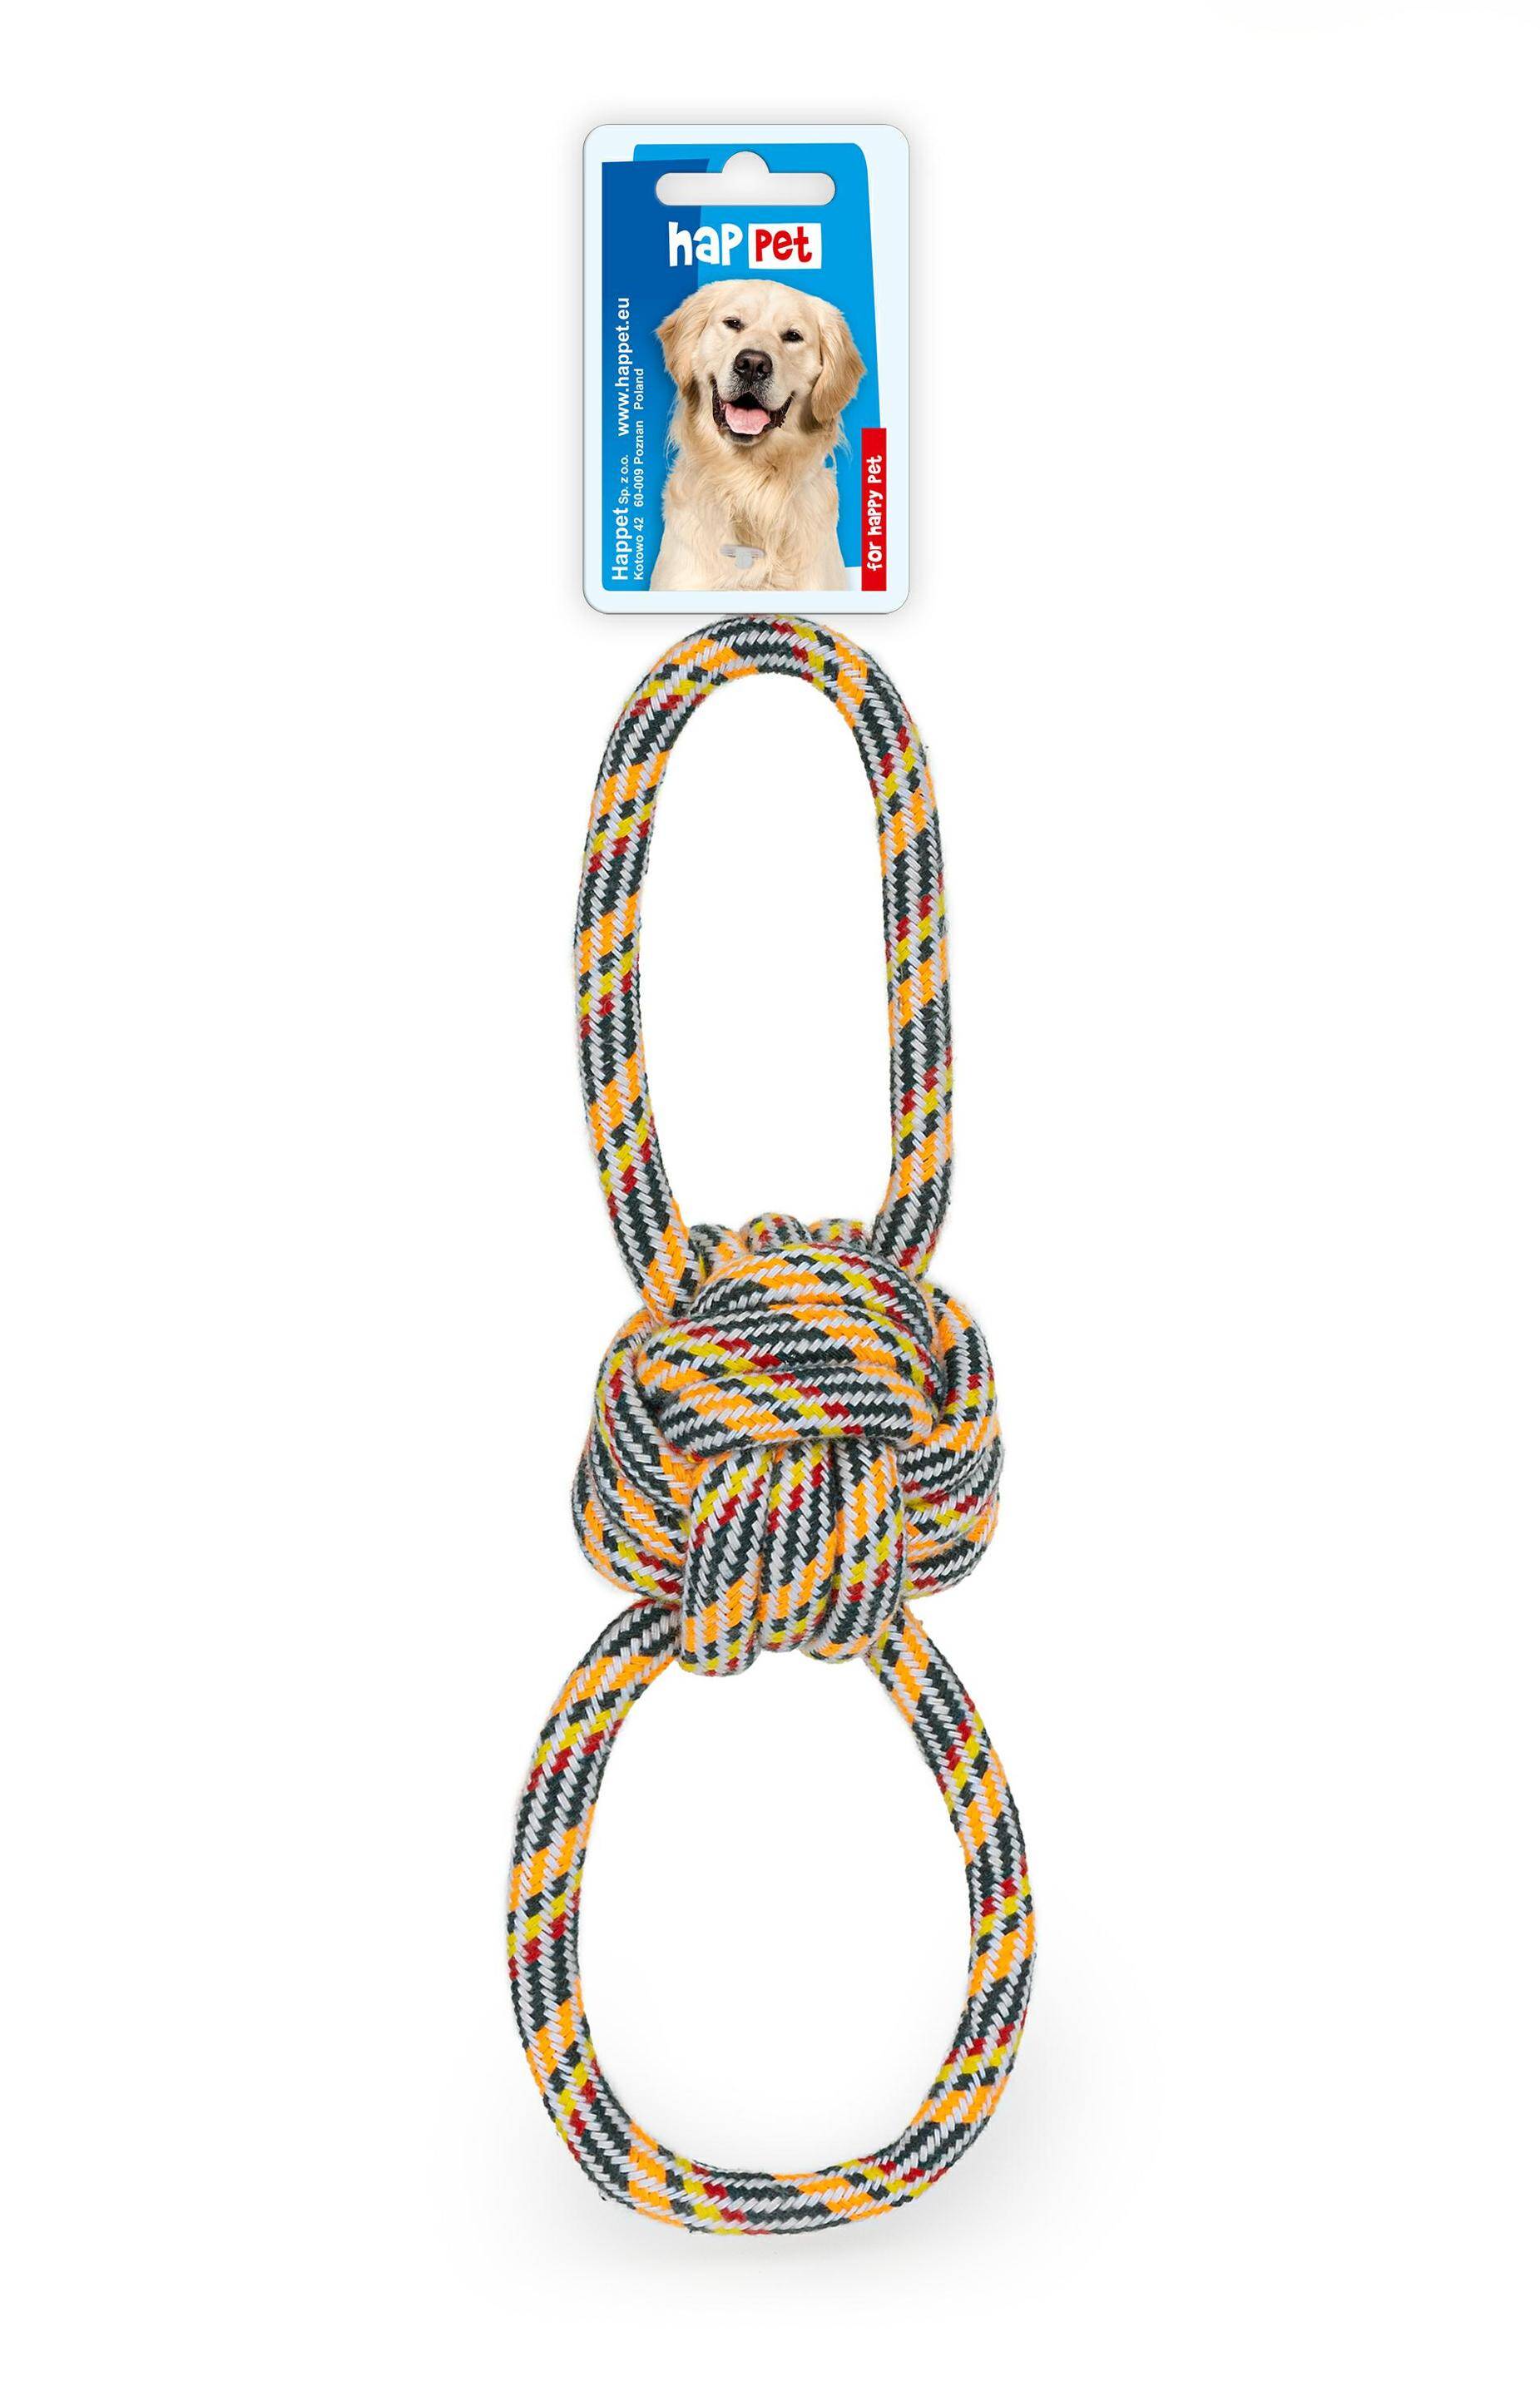 Z878 Rope ball with double loop 27 cm